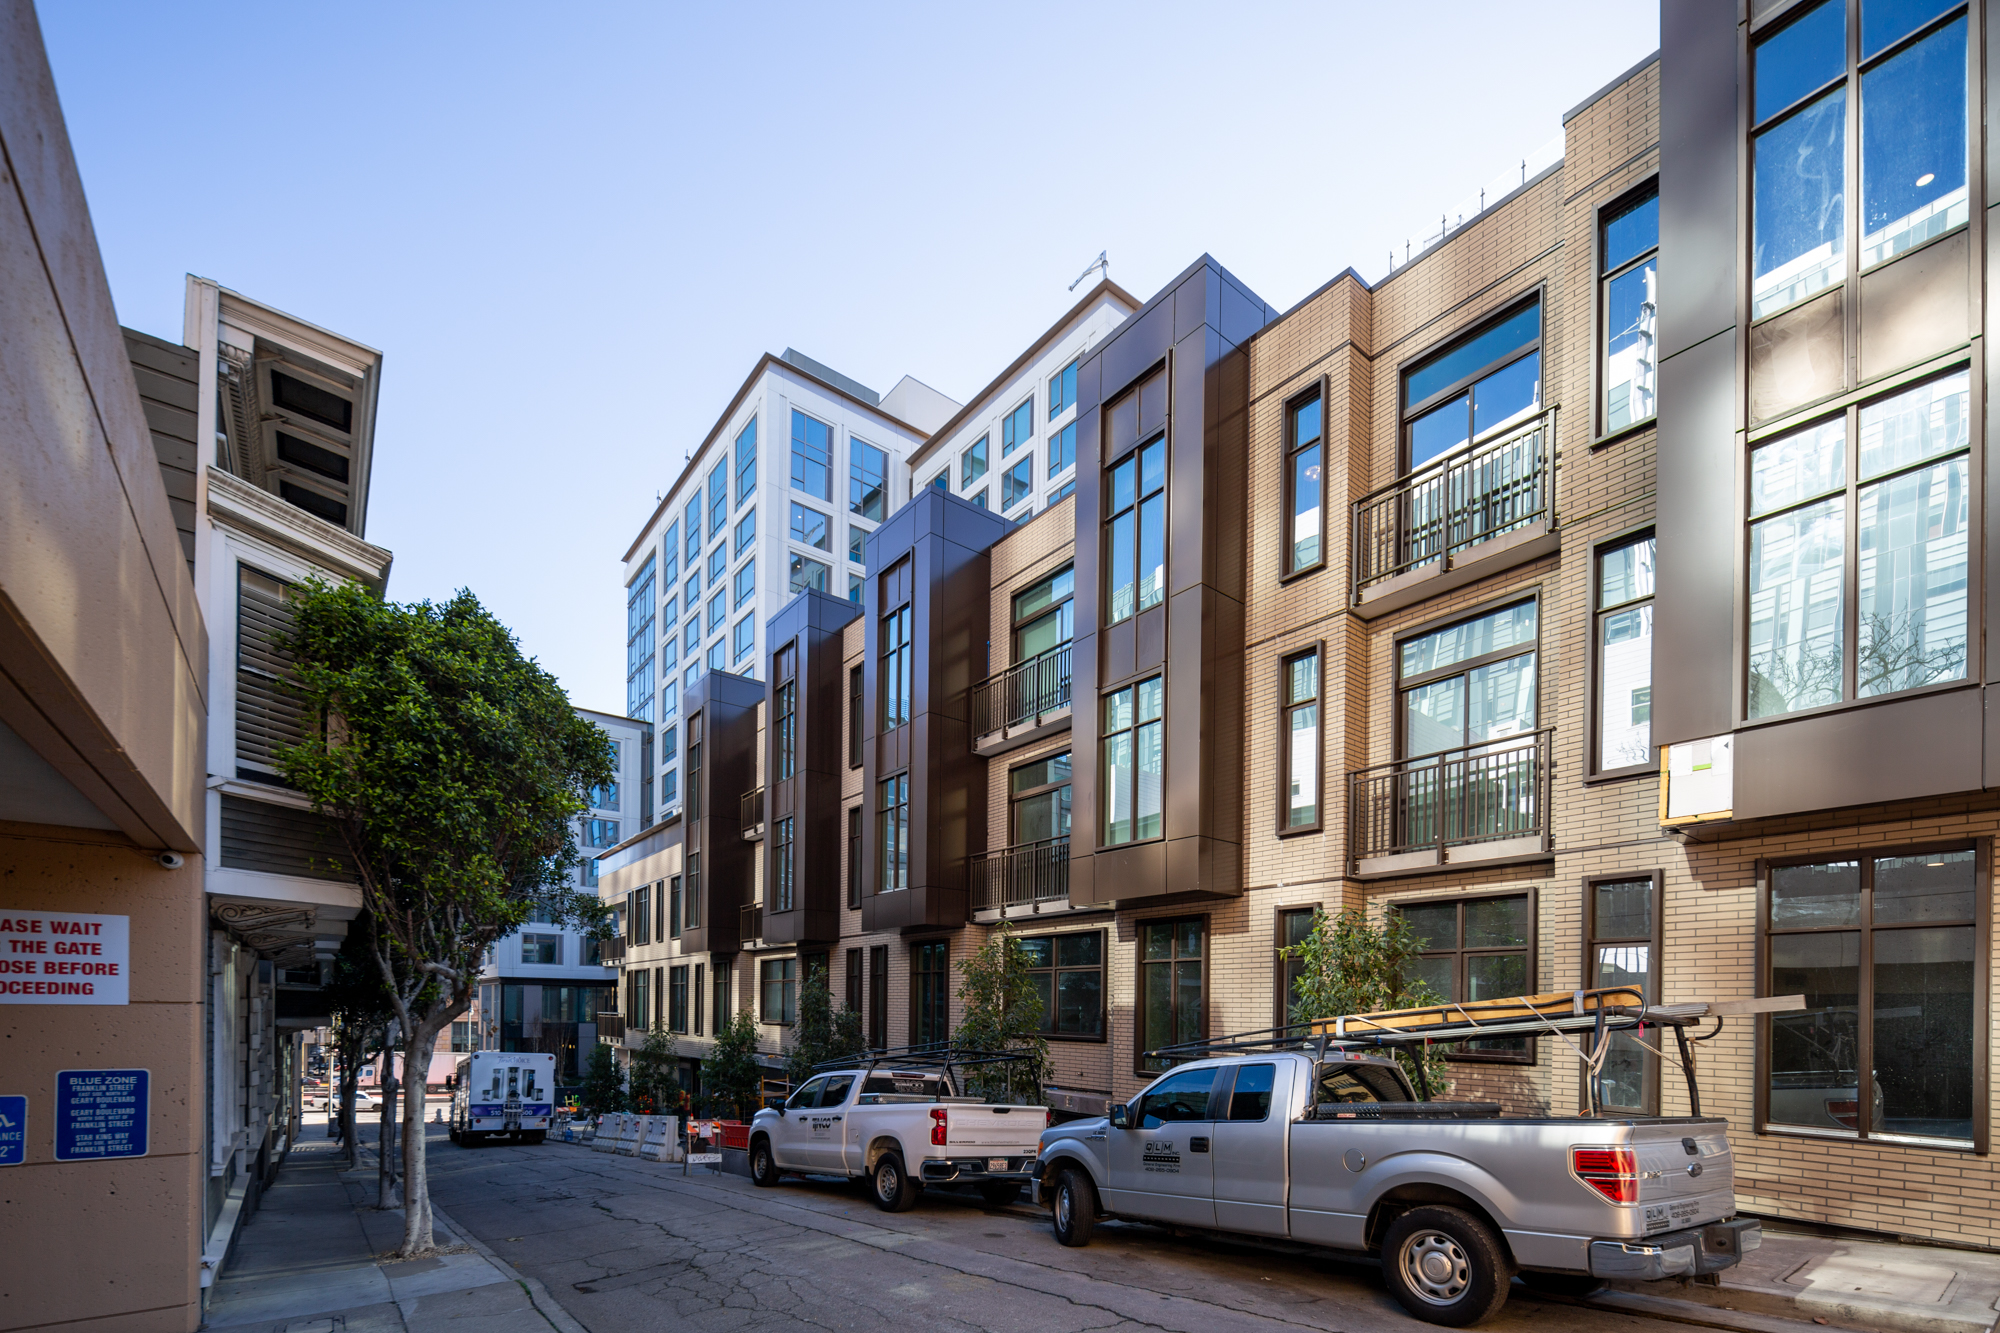 Myrtle Flats for 1001 Van Ness Avenue, image by Andrew Campbell Nelson